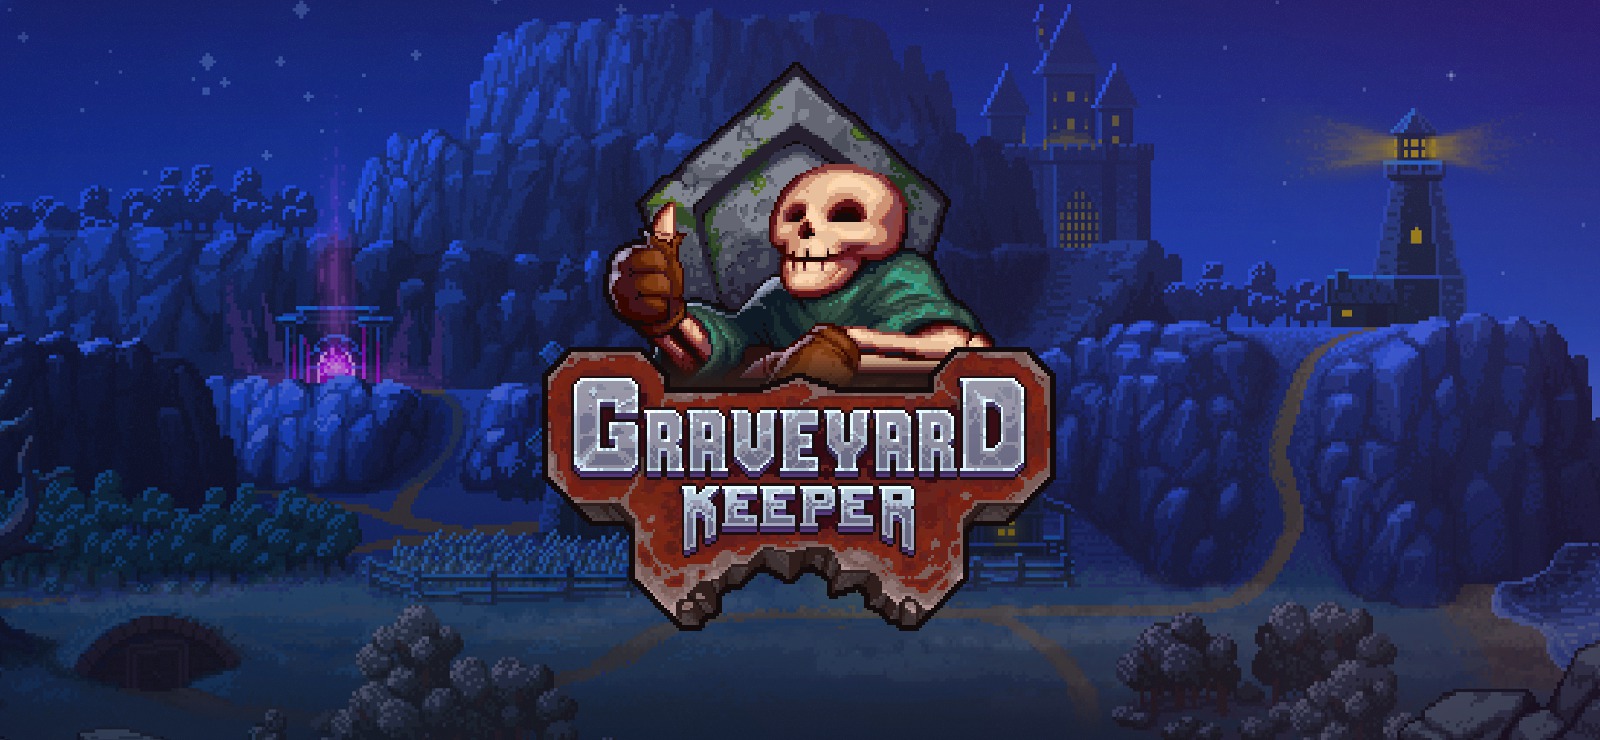 graveyard keeper items for snake quest